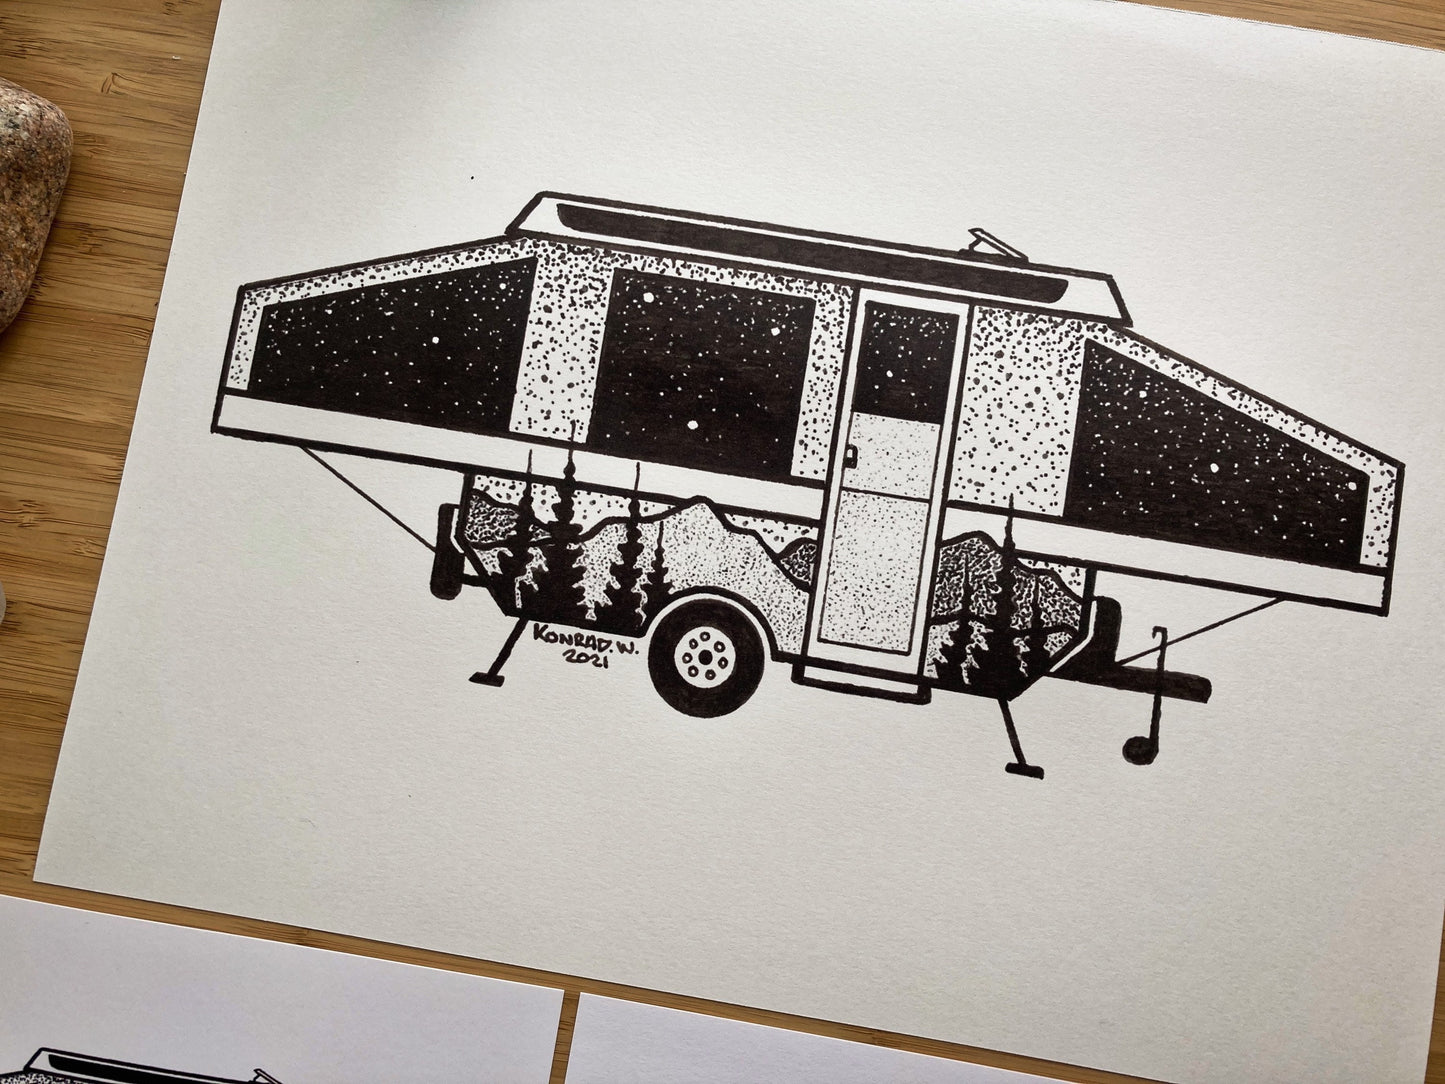 Tent Trailer - Pen and Ink PRINT